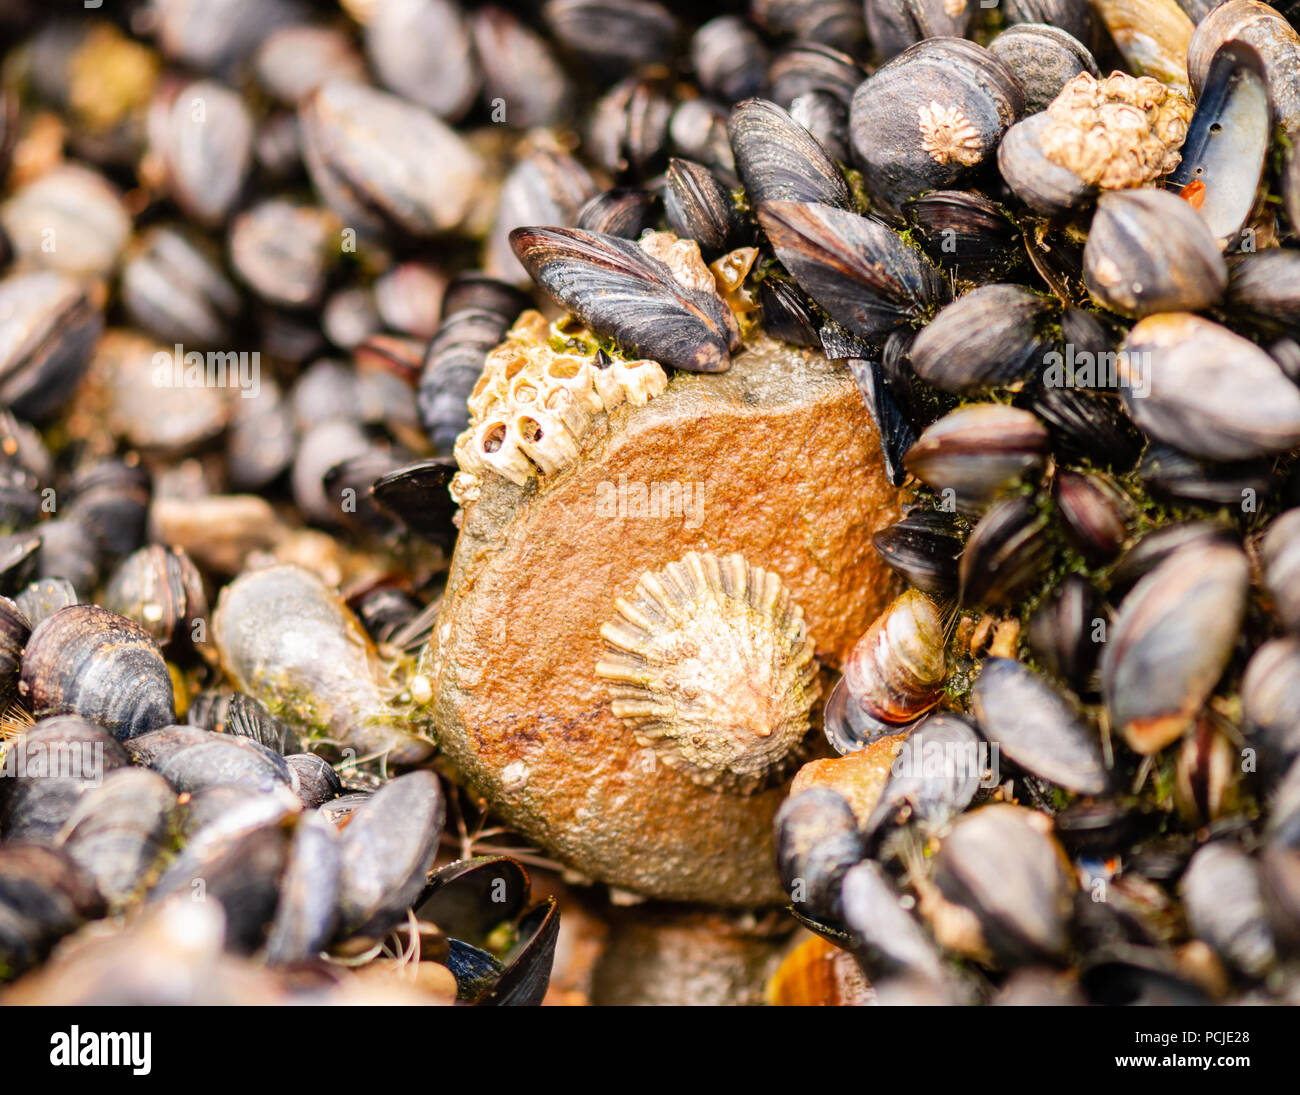 Close up of shells, including mussels, on a rock by the seaside in Bude, Cornwall Stock Photo